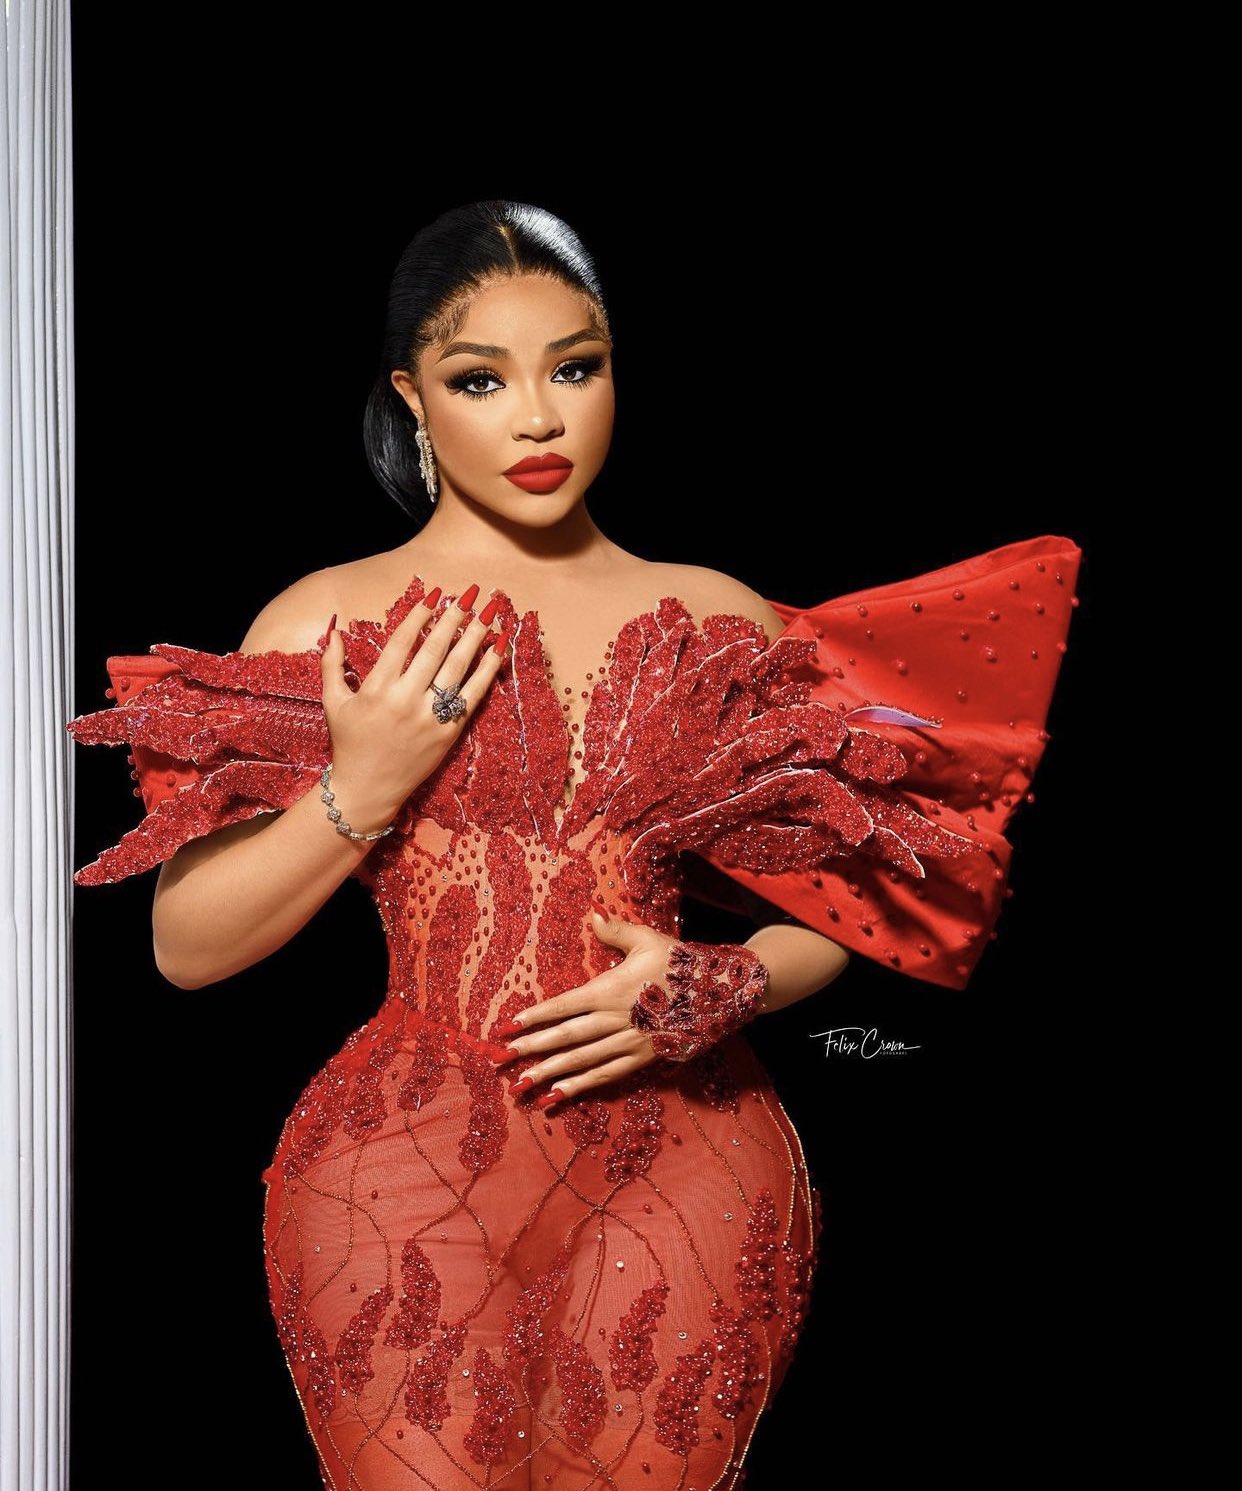 These are the best beauty looks at the Africa Magic Viewers’ Choice Awards looks worn by Nollywood celebrities. Here are the best makeup looks at The Africa Magic Viewers’ Choice Awards 2022,. Best Africa Magic Viewers’ Choice Awards 2022 Africa Magic Viewers’ Choice Awards 2022 outfits full list, worst Africa Magic Viewers’ Choice Awards 2022, Africa Magic Viewers’ Choice Awards 2022 red carpet. amvca meaning, amvca 2022 nominations, amvca 2022 dates, amvca 2022 nominees list, amvca 2022 nominees and winners, amvca 2022 date and time, amvca best dressed 2022, amvca 2022 winners list, amvca 2022 best dressed male, amvca 2022 venue.